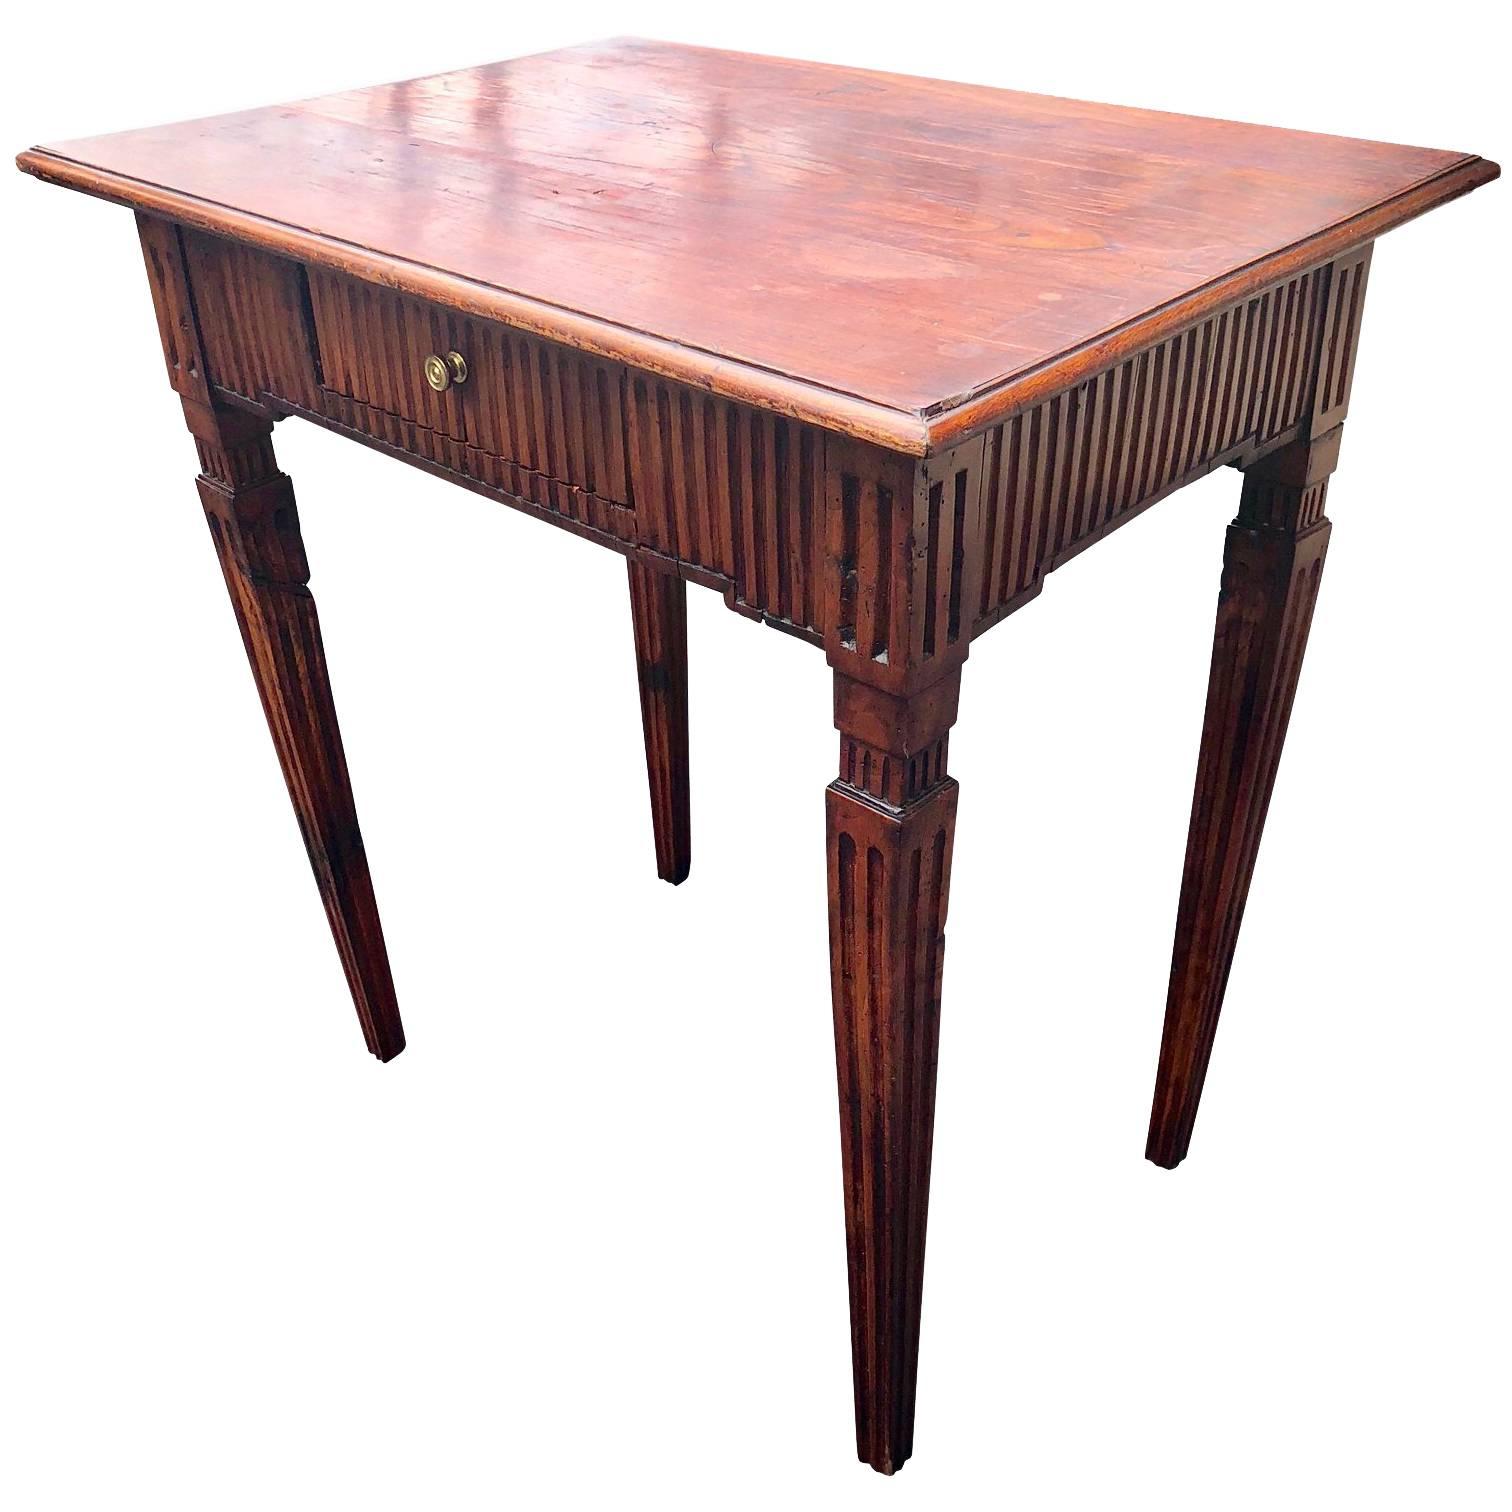 French 18th Century Table With Fluted Apron And Legs For Sale